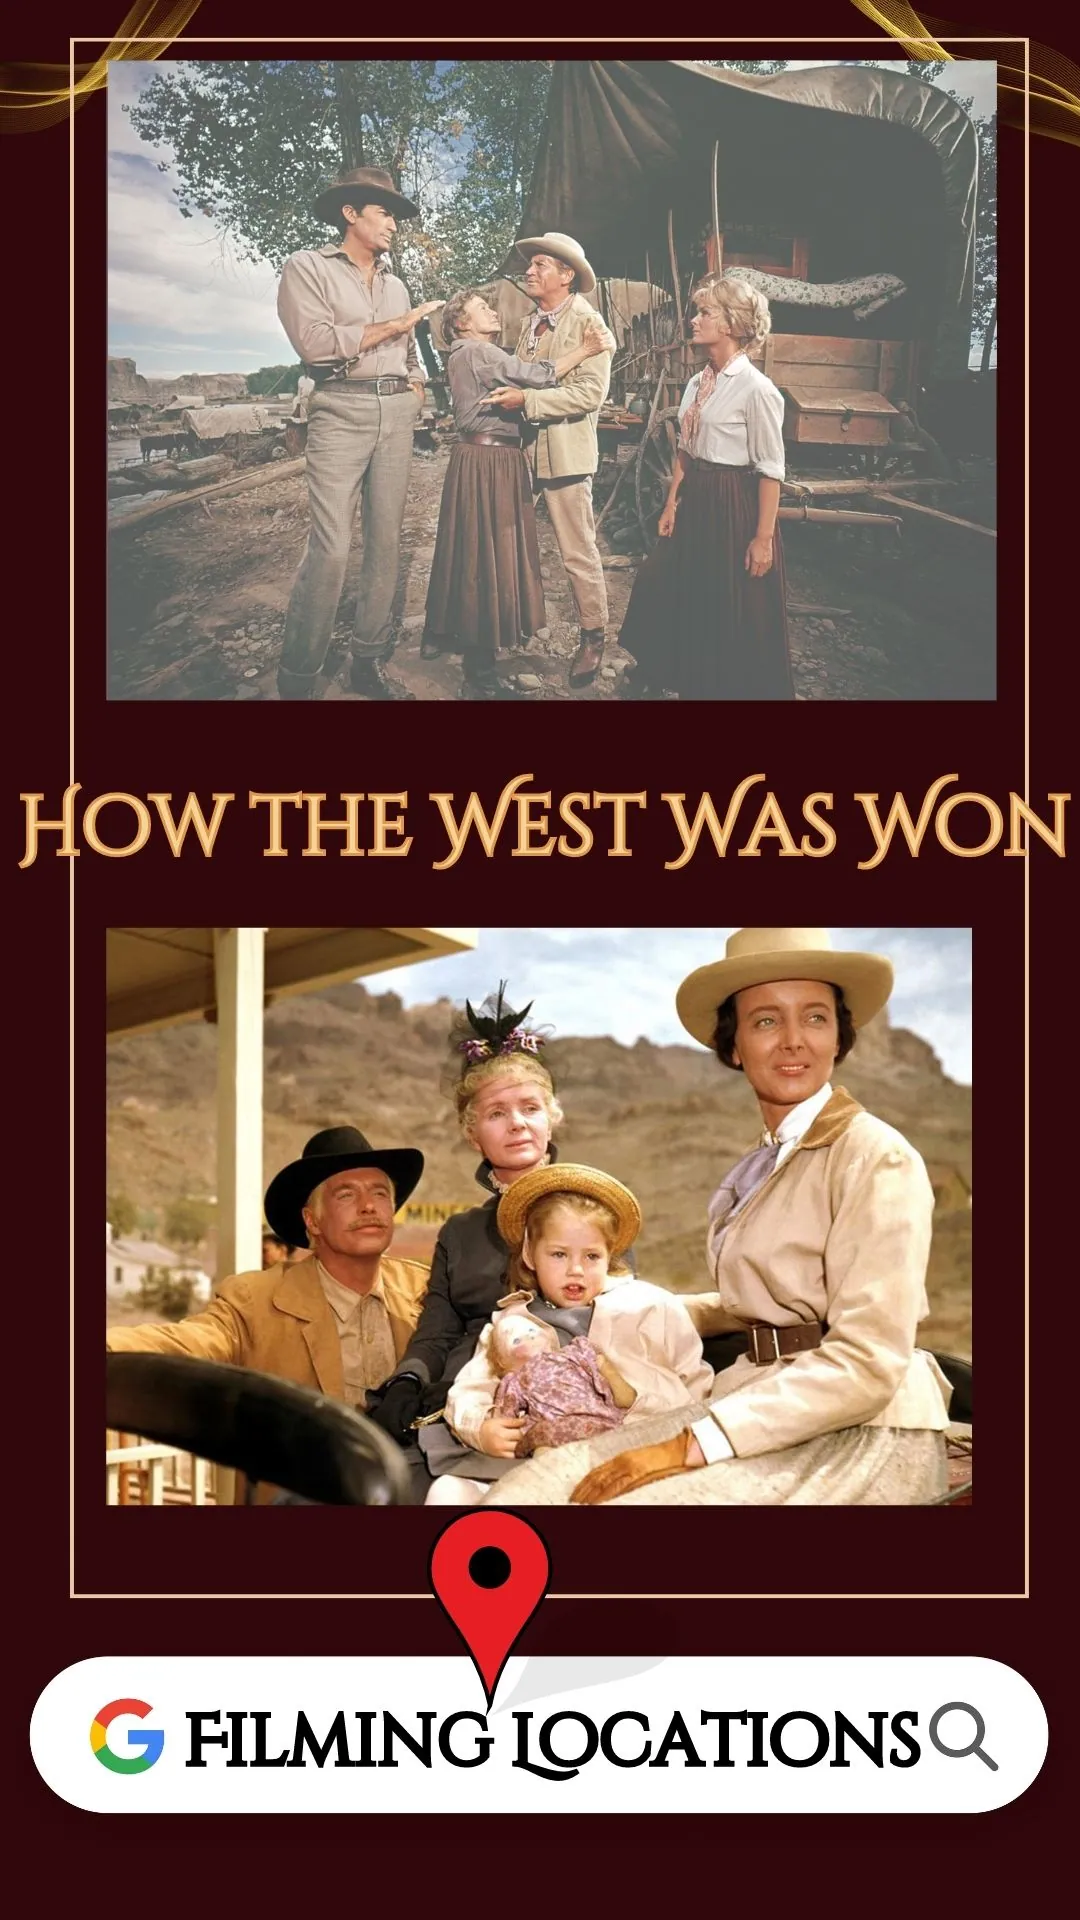 How the West Was Won Filming Location (1962)